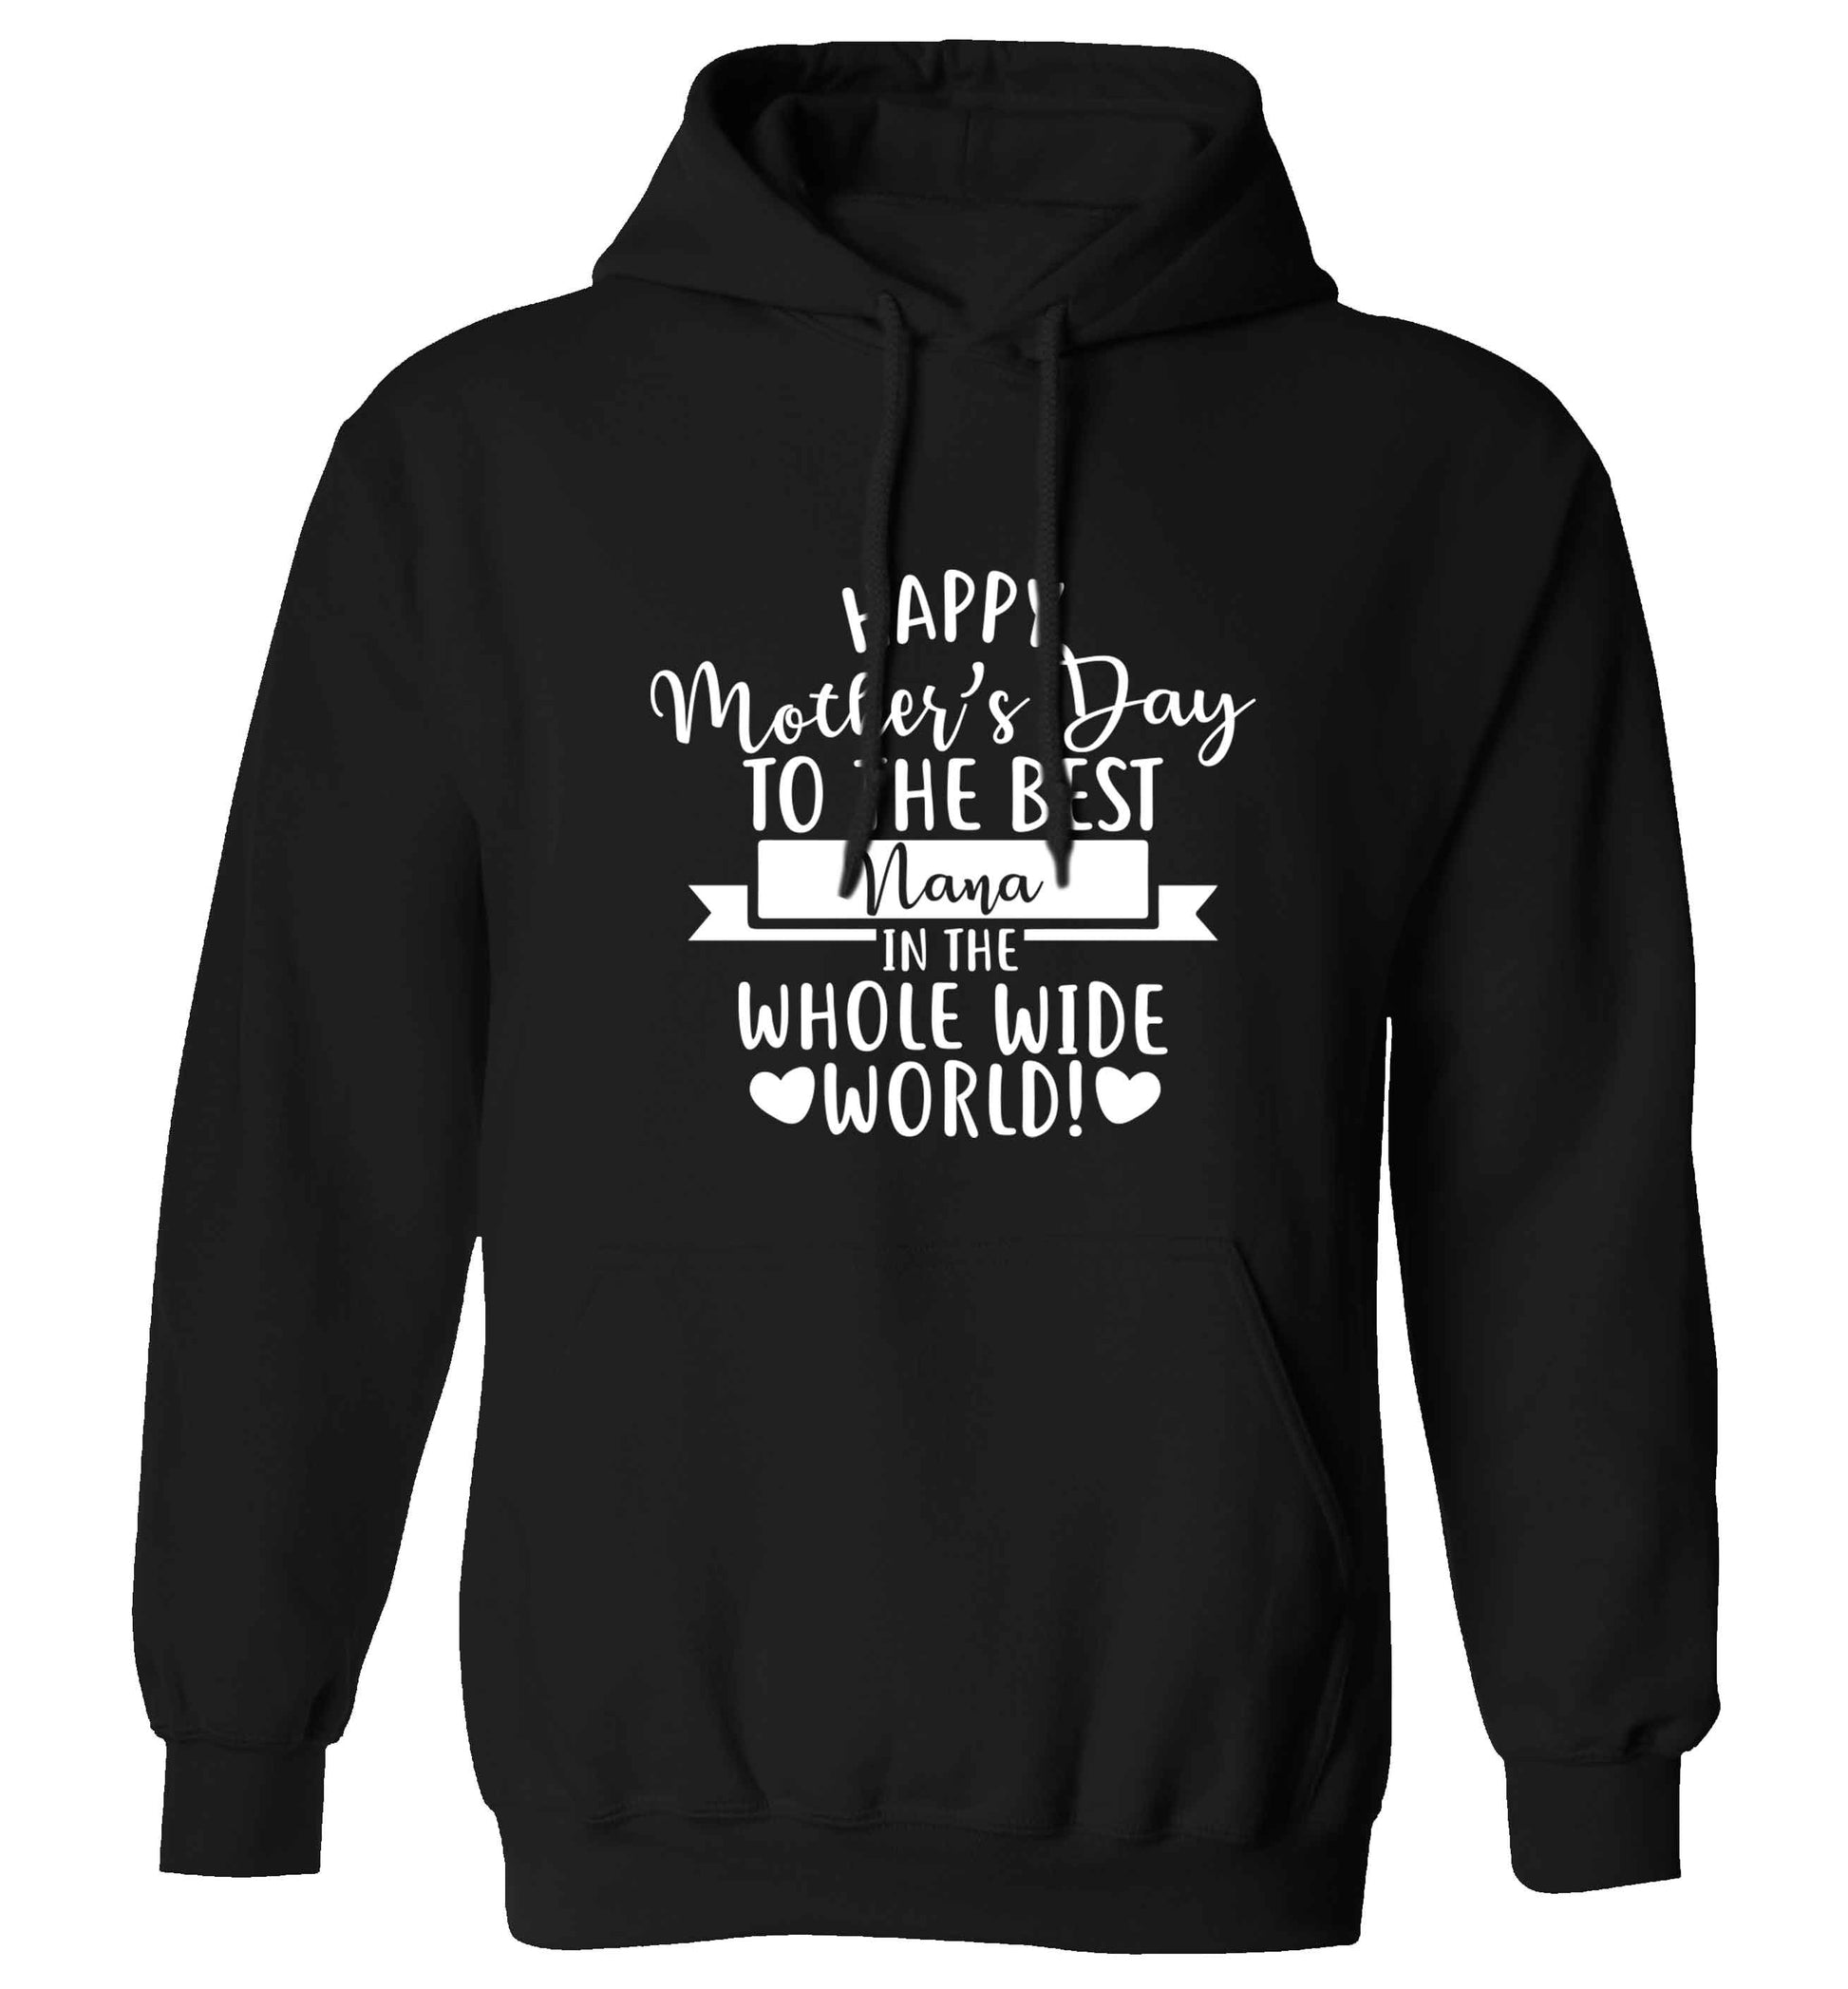 Happy mother's day to the best nana in the world adults unisex black hoodie 2XL